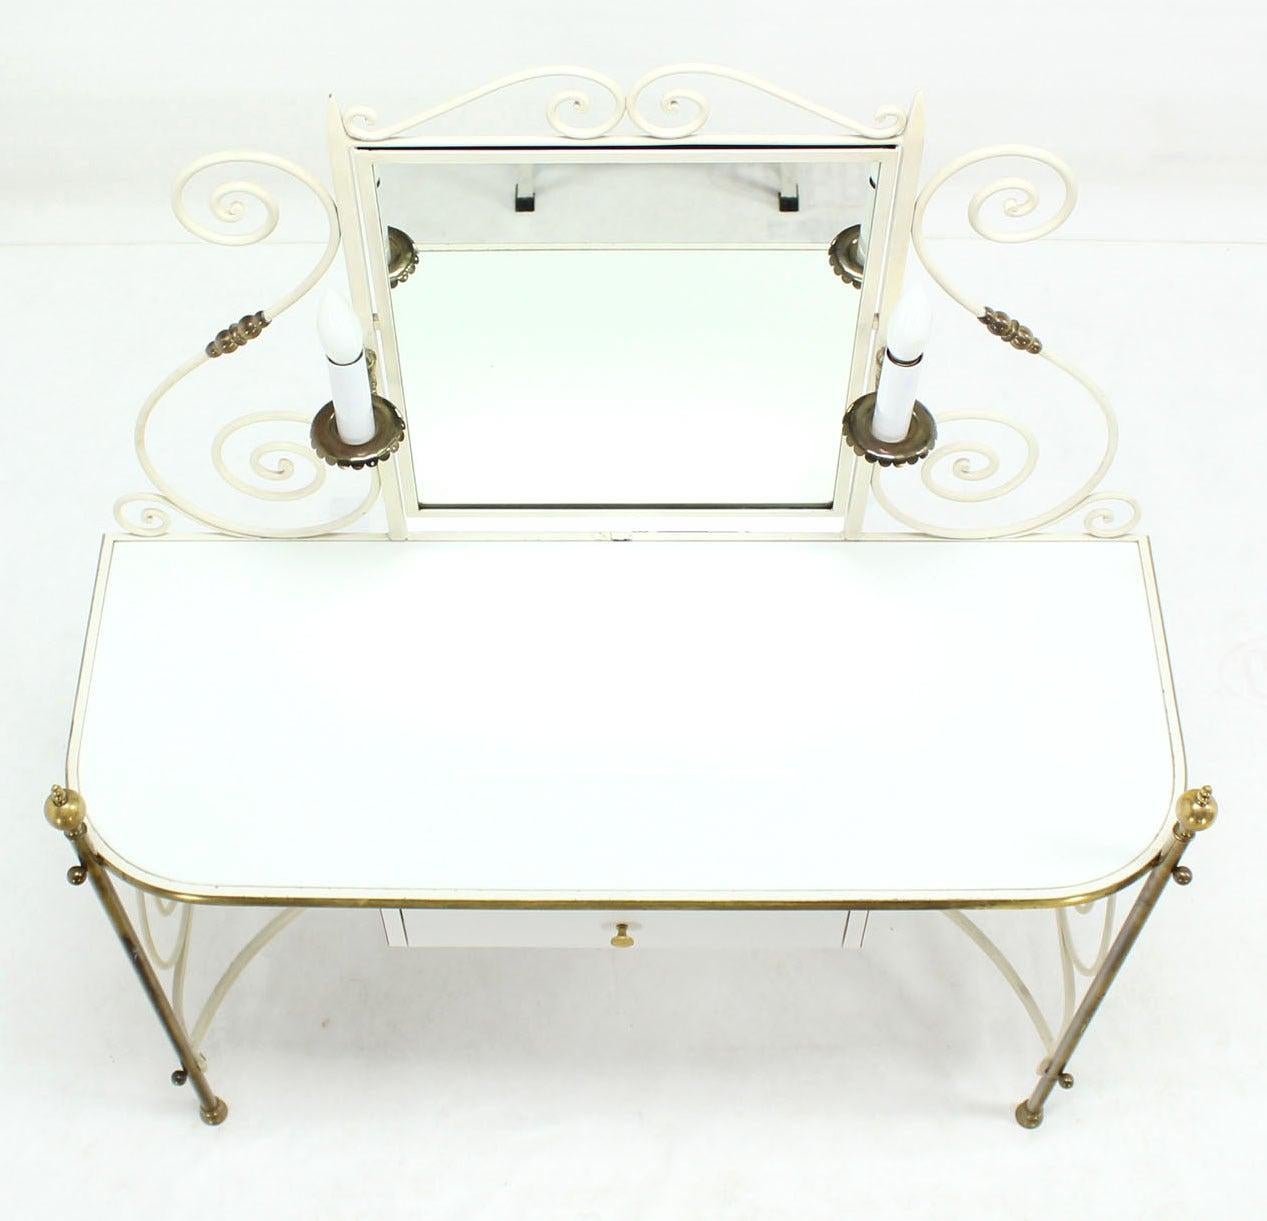 Decorative Vanity Dressing Table Milk Glass Top Metal Scroll Brass Hardware MINT In Excellent Condition For Sale In Rockaway, NJ